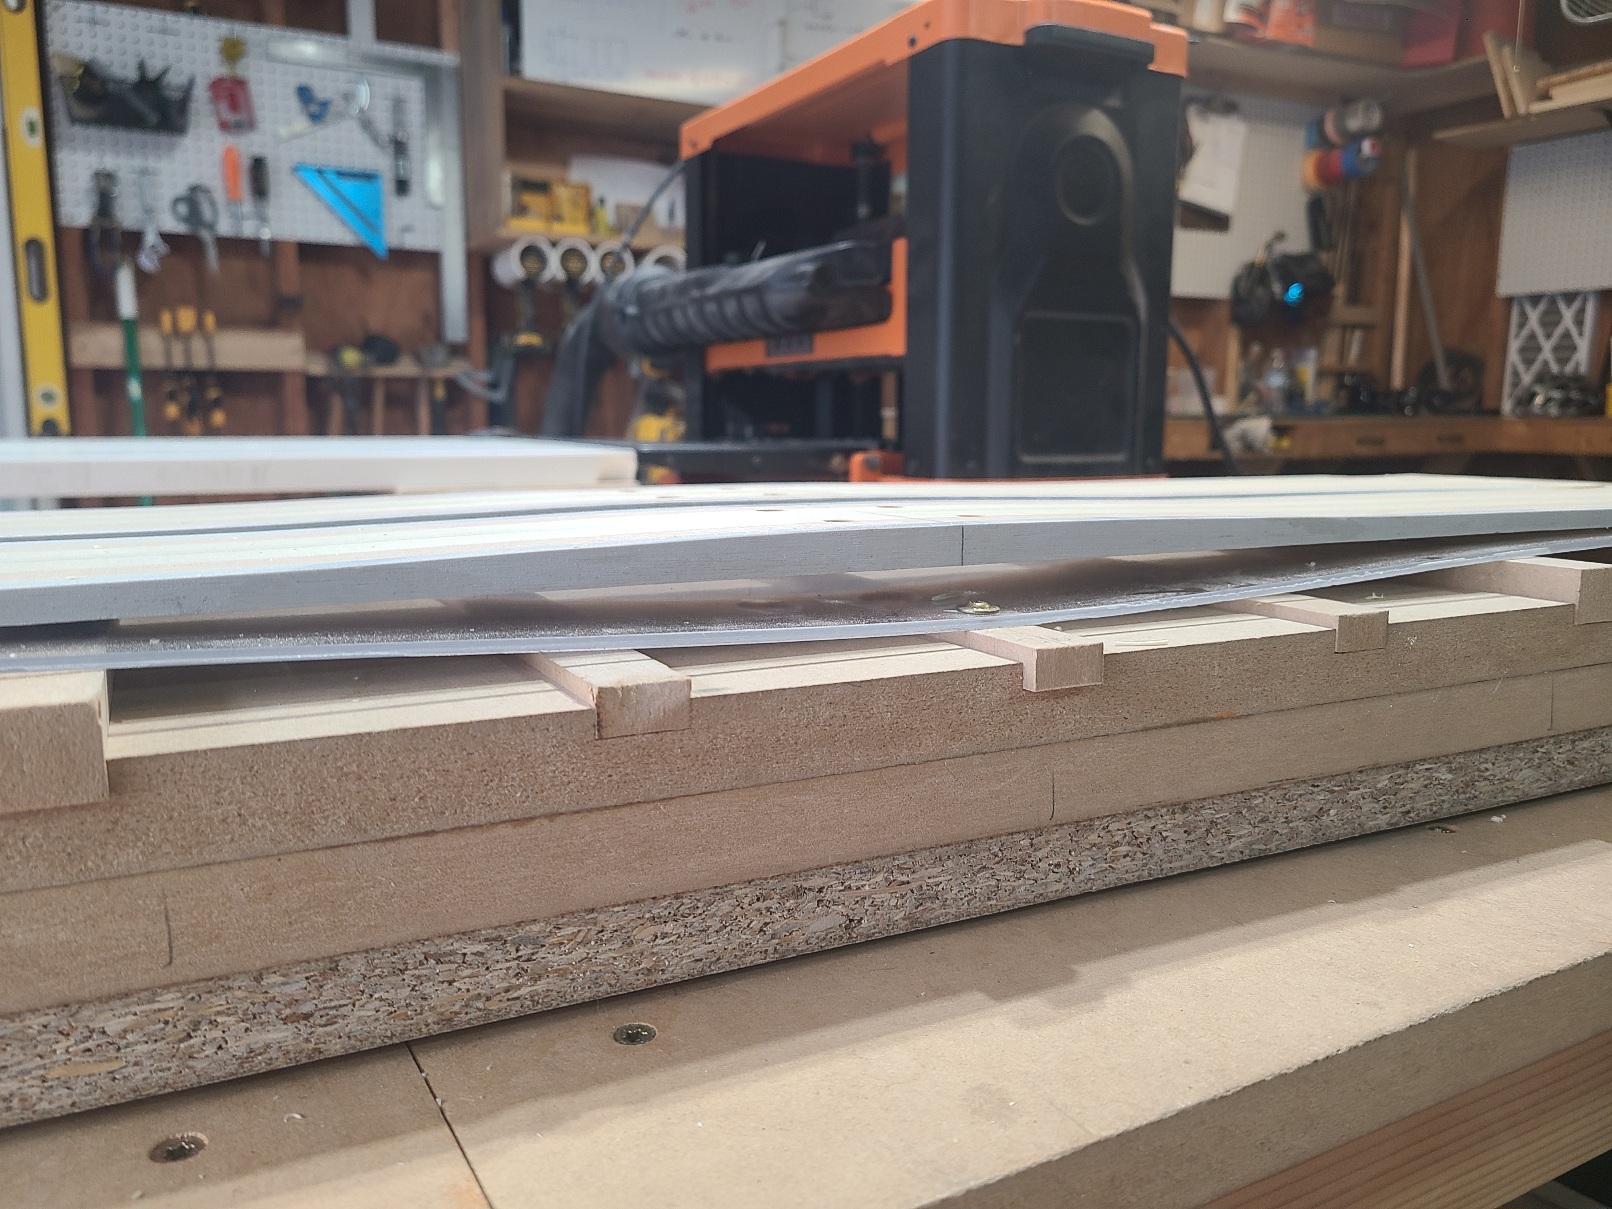 Profile after thickness planer (these are snow blades)